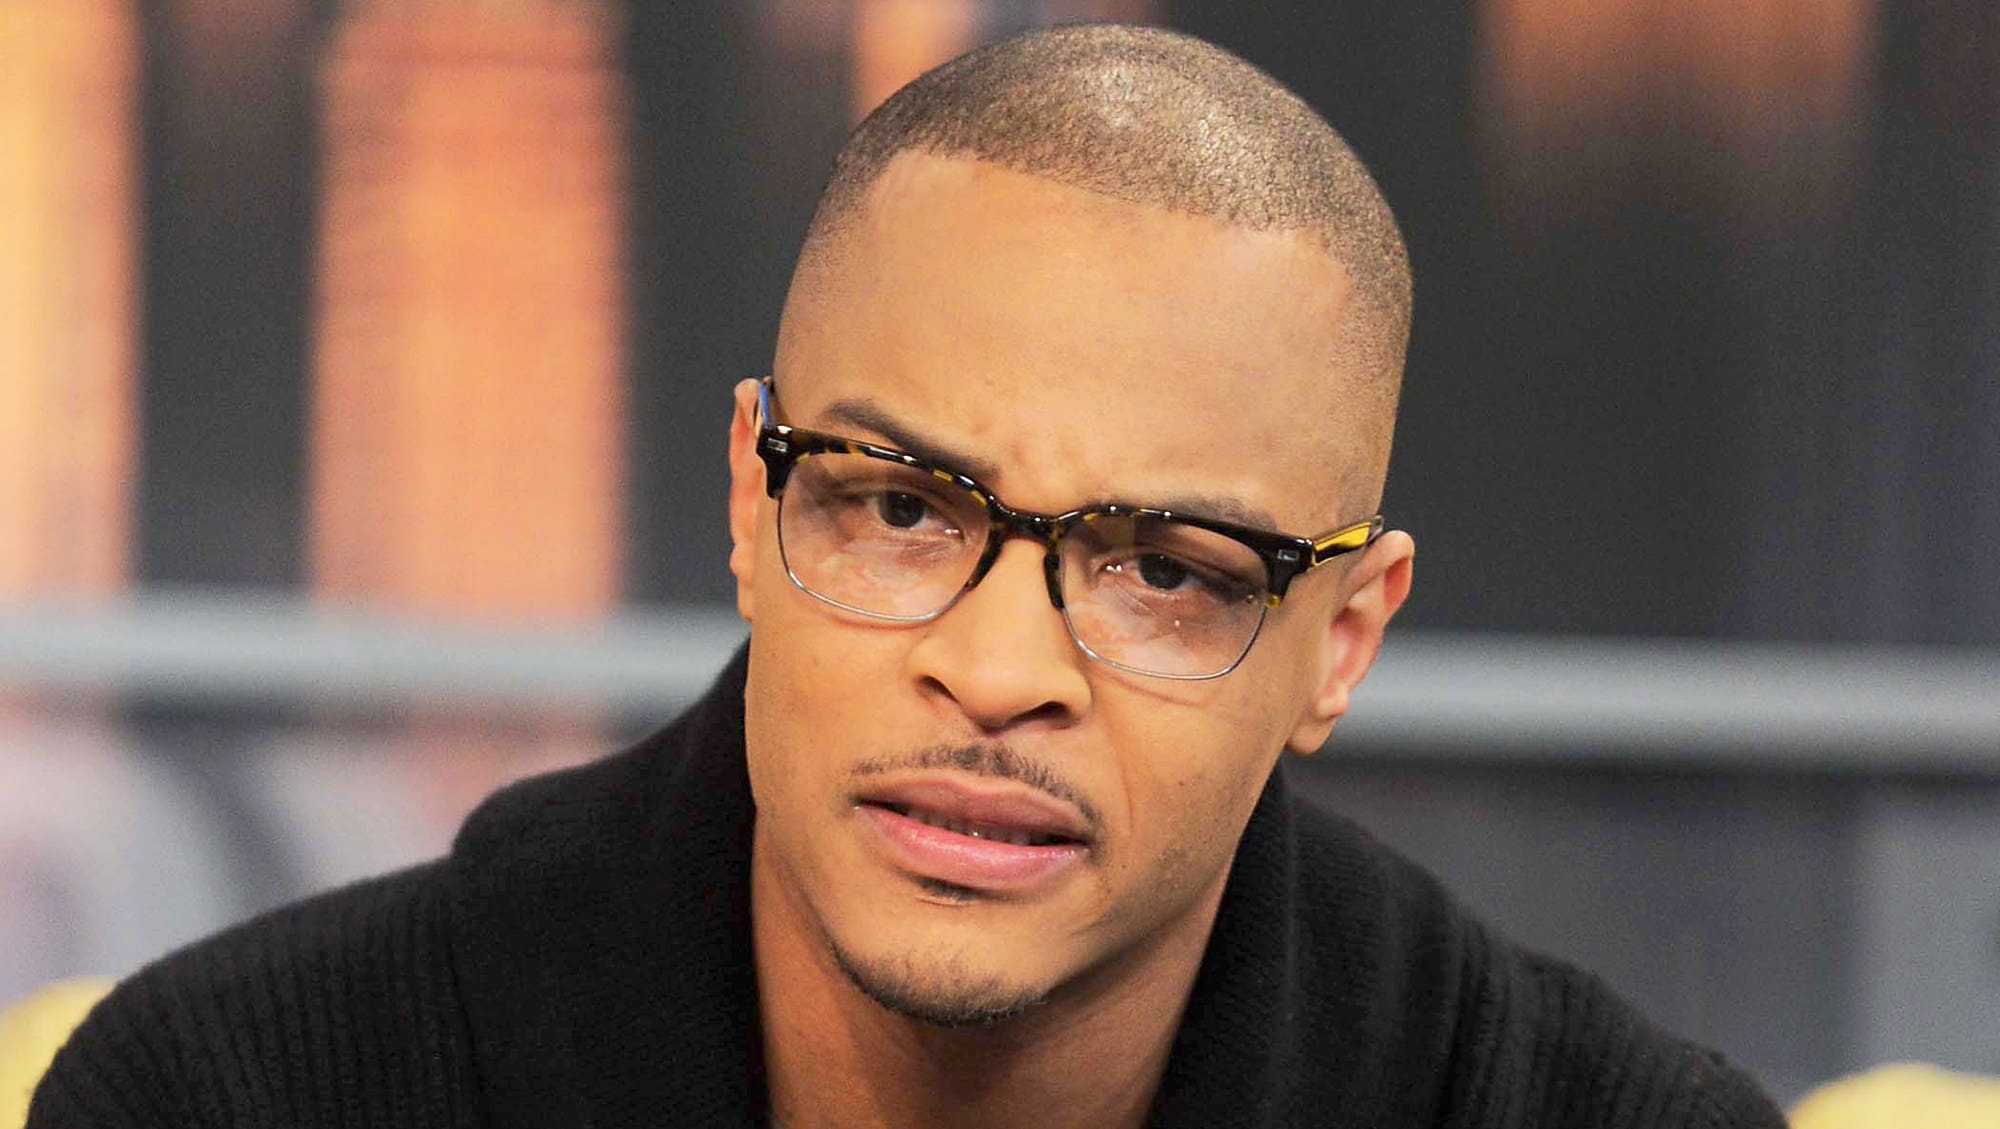 T.I. Has An Important Message About Atlanta - Check Out His Post